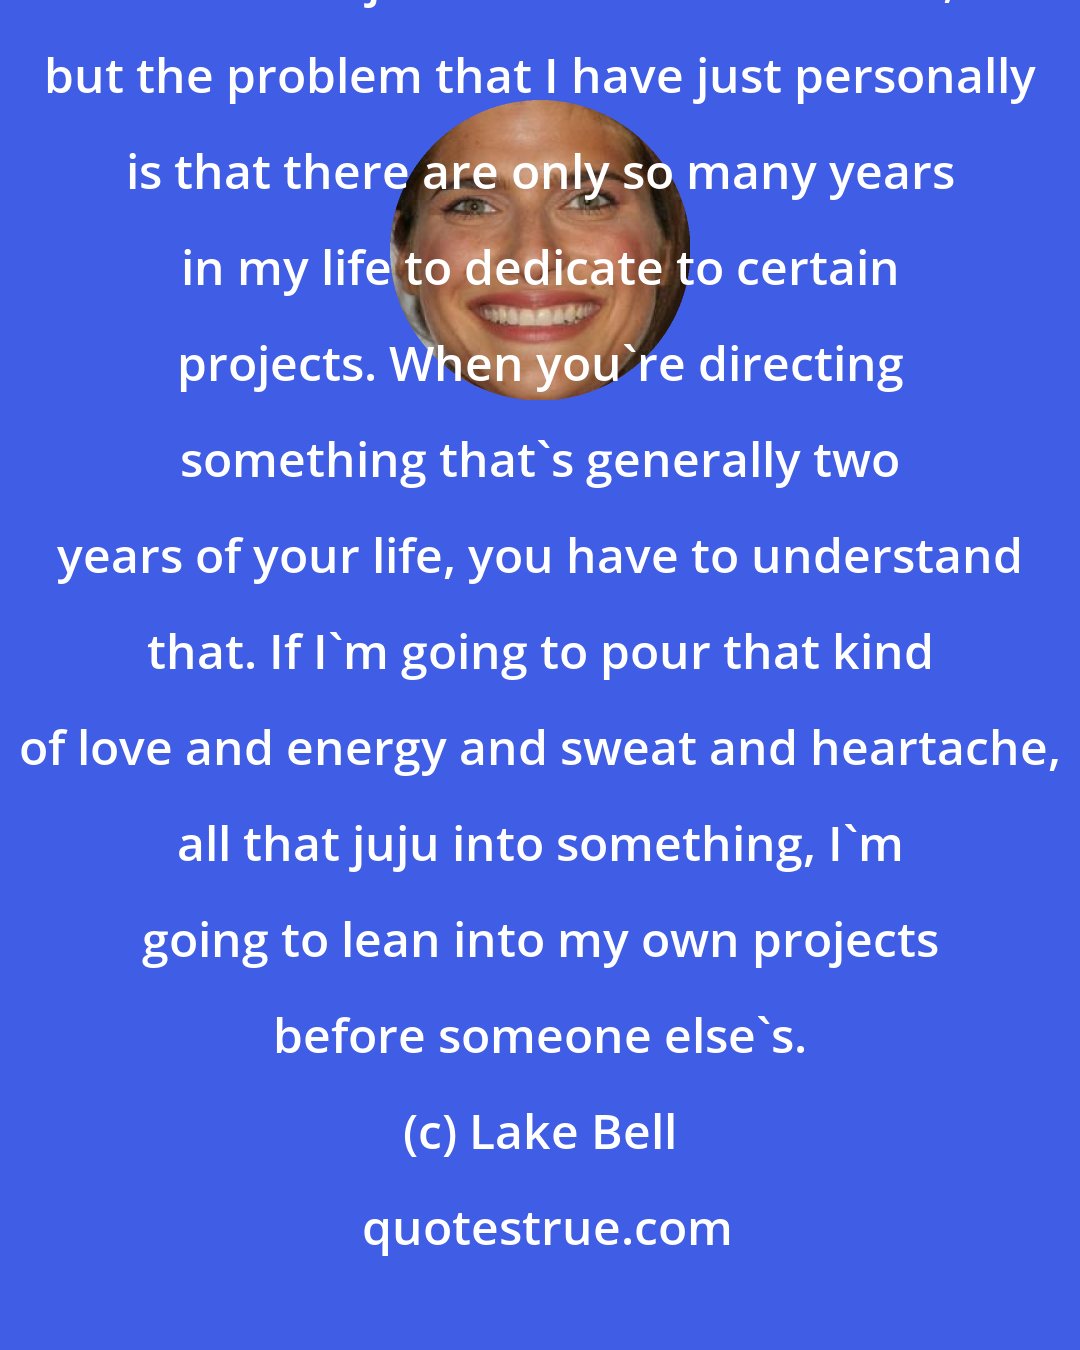 Lake Bell: I'll be totally honest in that I feel tremendously lucky that I am offered incredible jobs all the time to direct, but the problem that I have just personally is that there are only so many years in my life to dedicate to certain projects. When you're directing something that's generally two years of your life, you have to understand that. If I'm going to pour that kind of love and energy and sweat and heartache, all that juju into something, I'm going to lean into my own projects before someone else's.